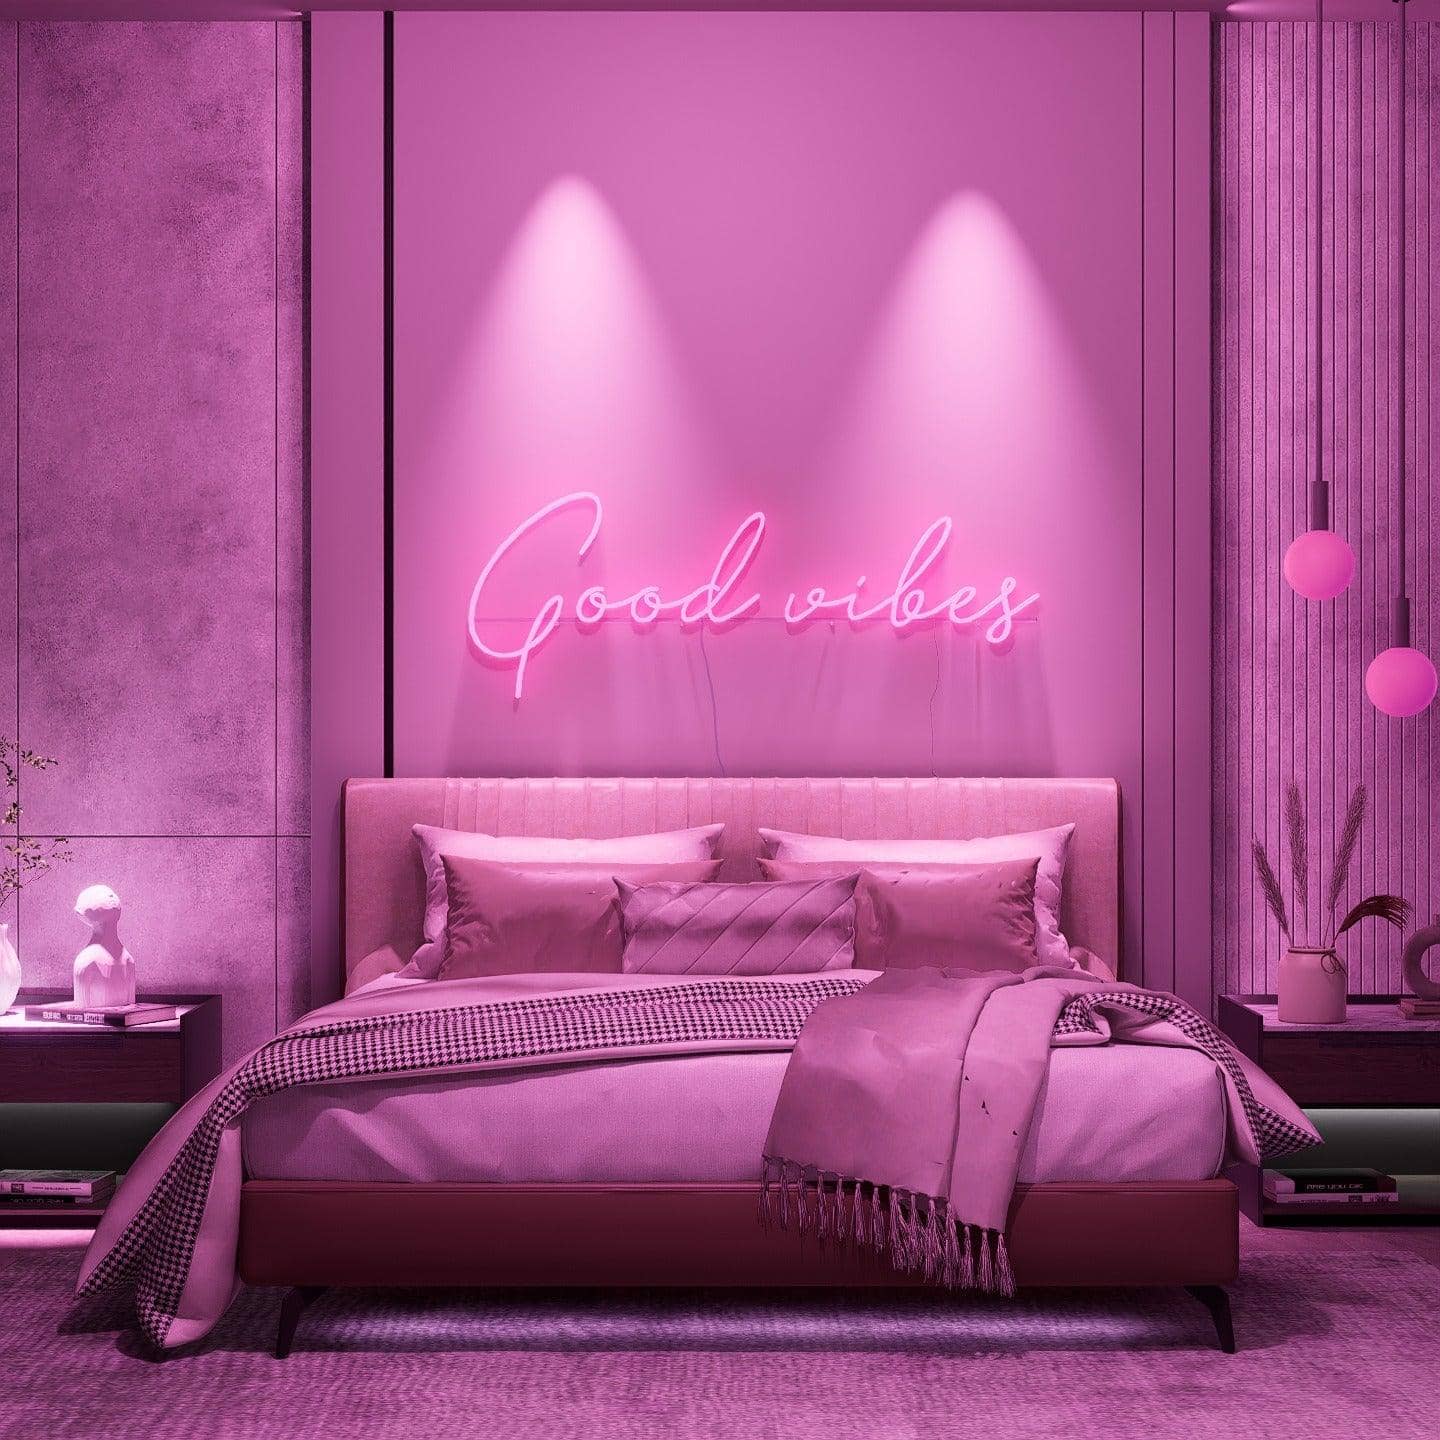 light-up-pink-neon-lights-hanging-on-the-wall-for-display-at-night-good-vibes